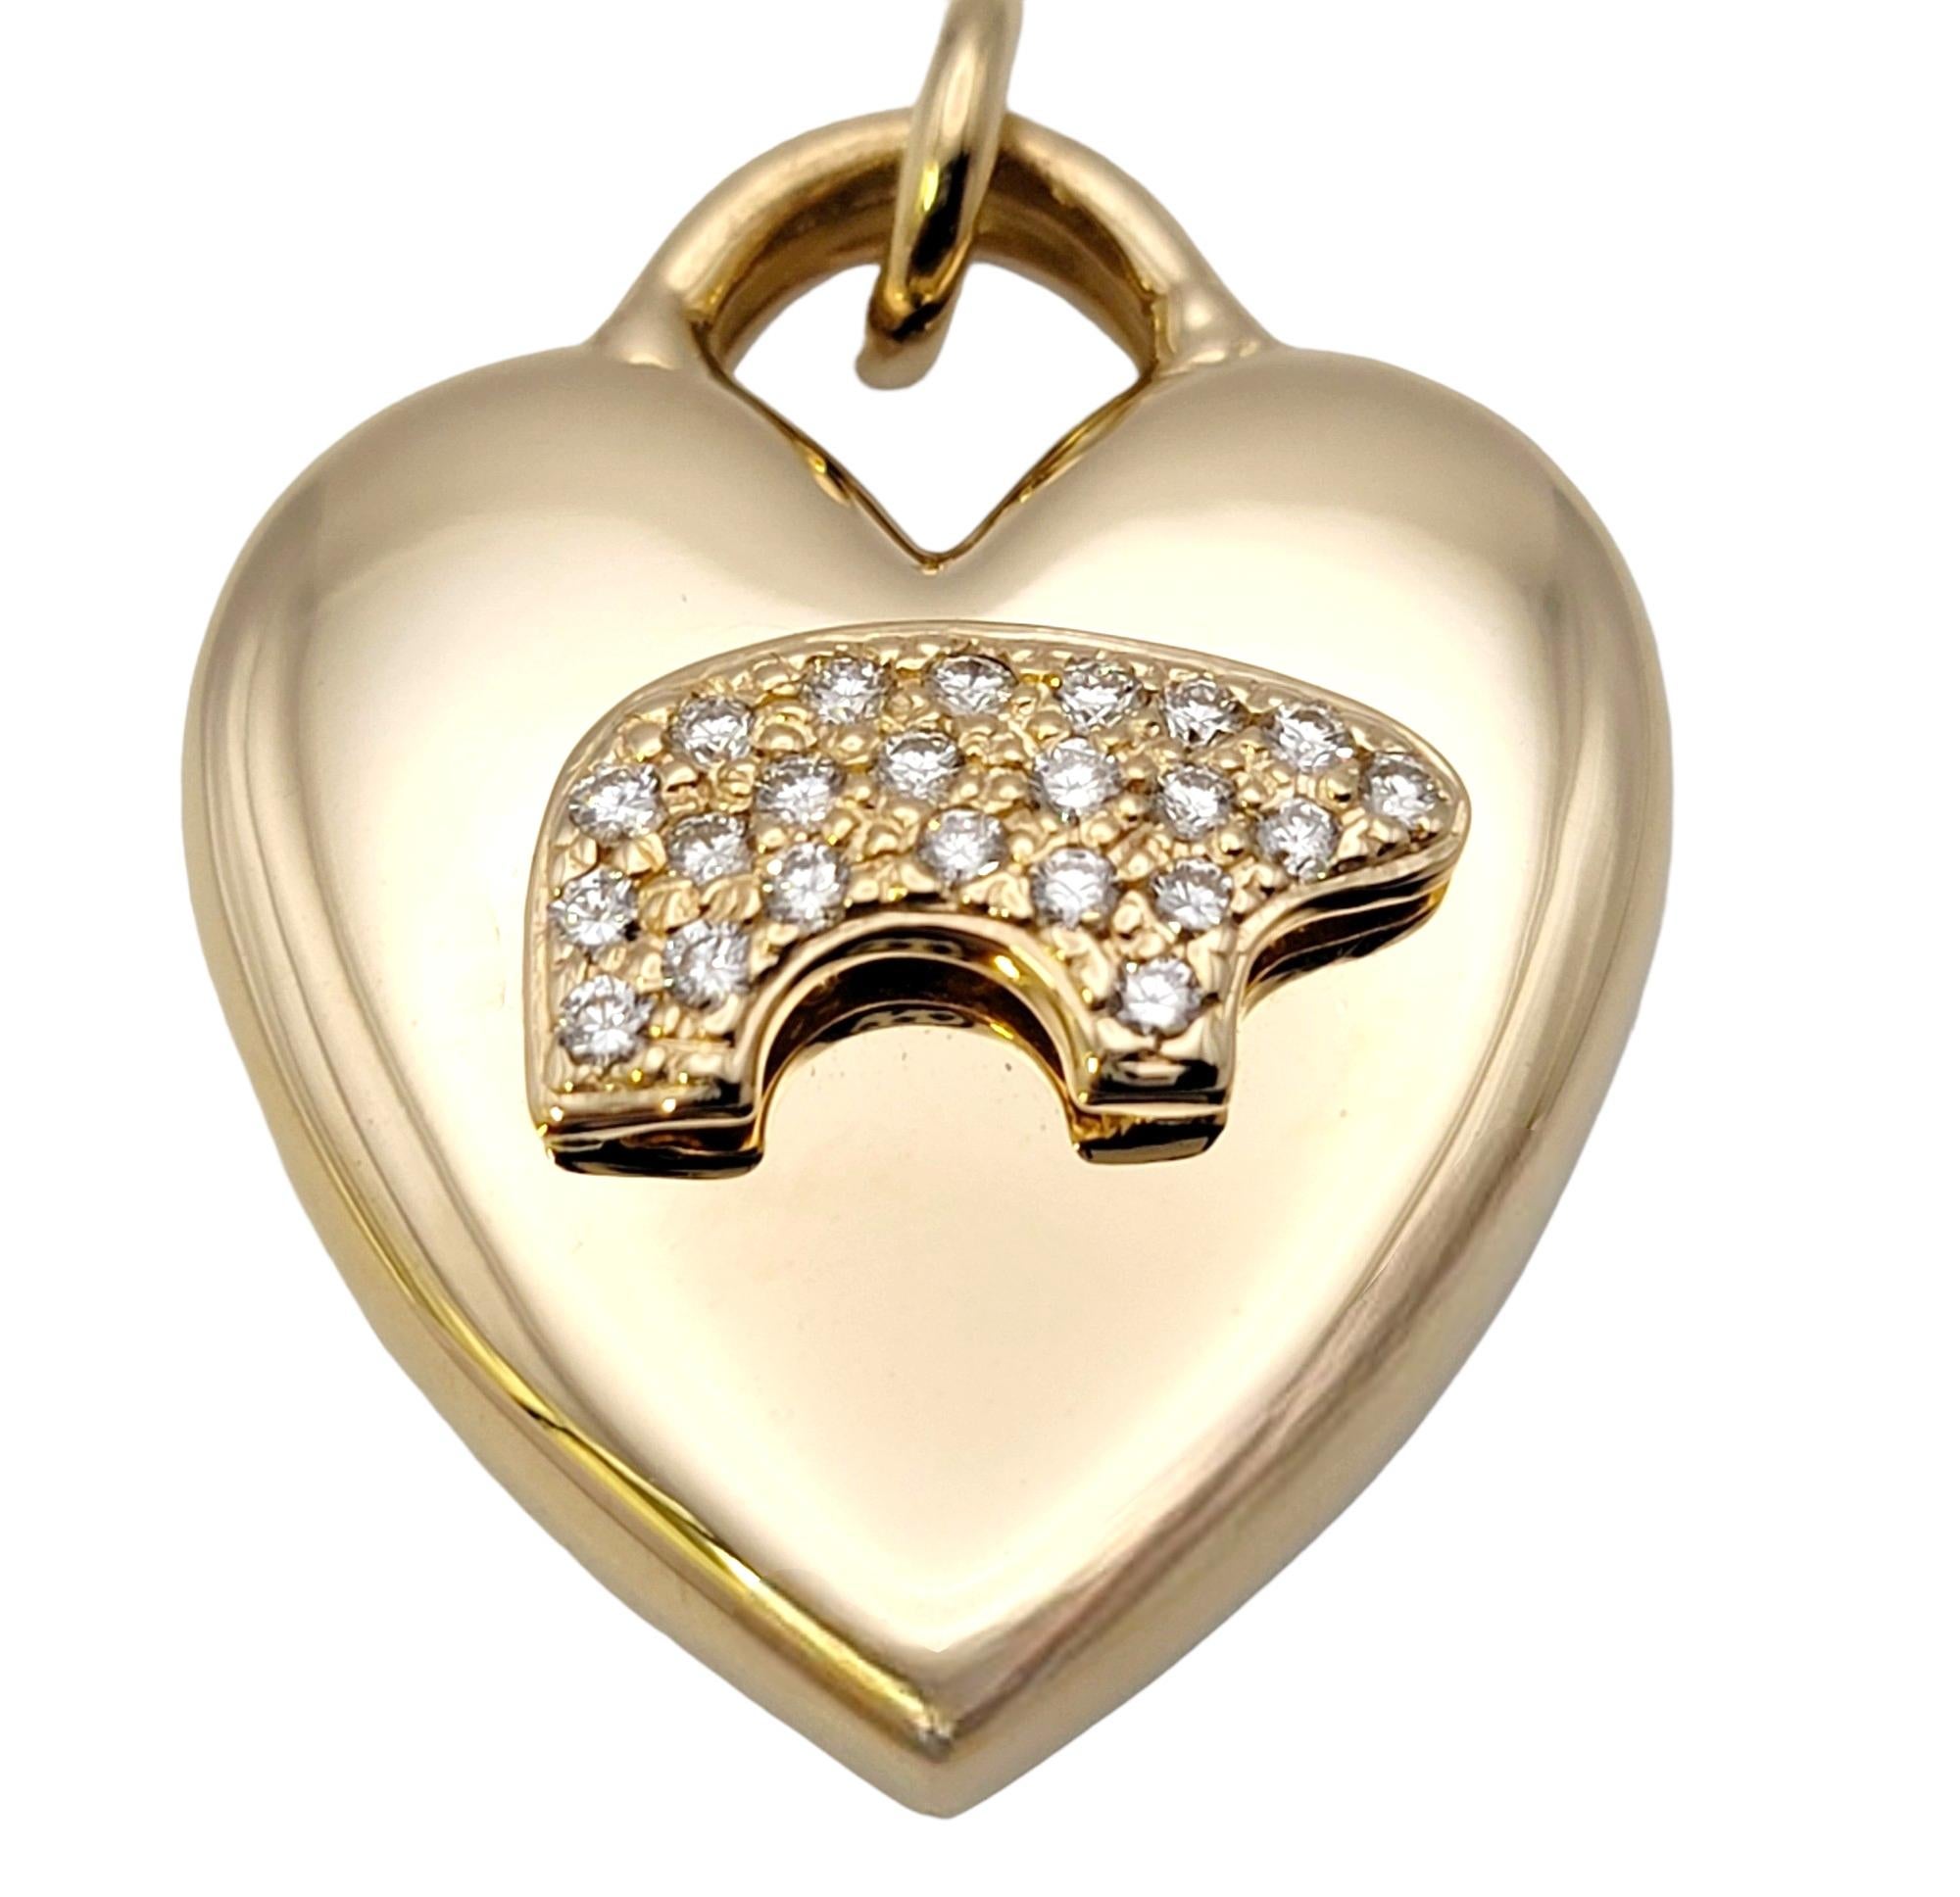 This charming heart pendant was designed by The Golden Bear. Founded in Vail, Colorado, in 1975, the Golden Bear store's distinctive little bruin would become recognized as 